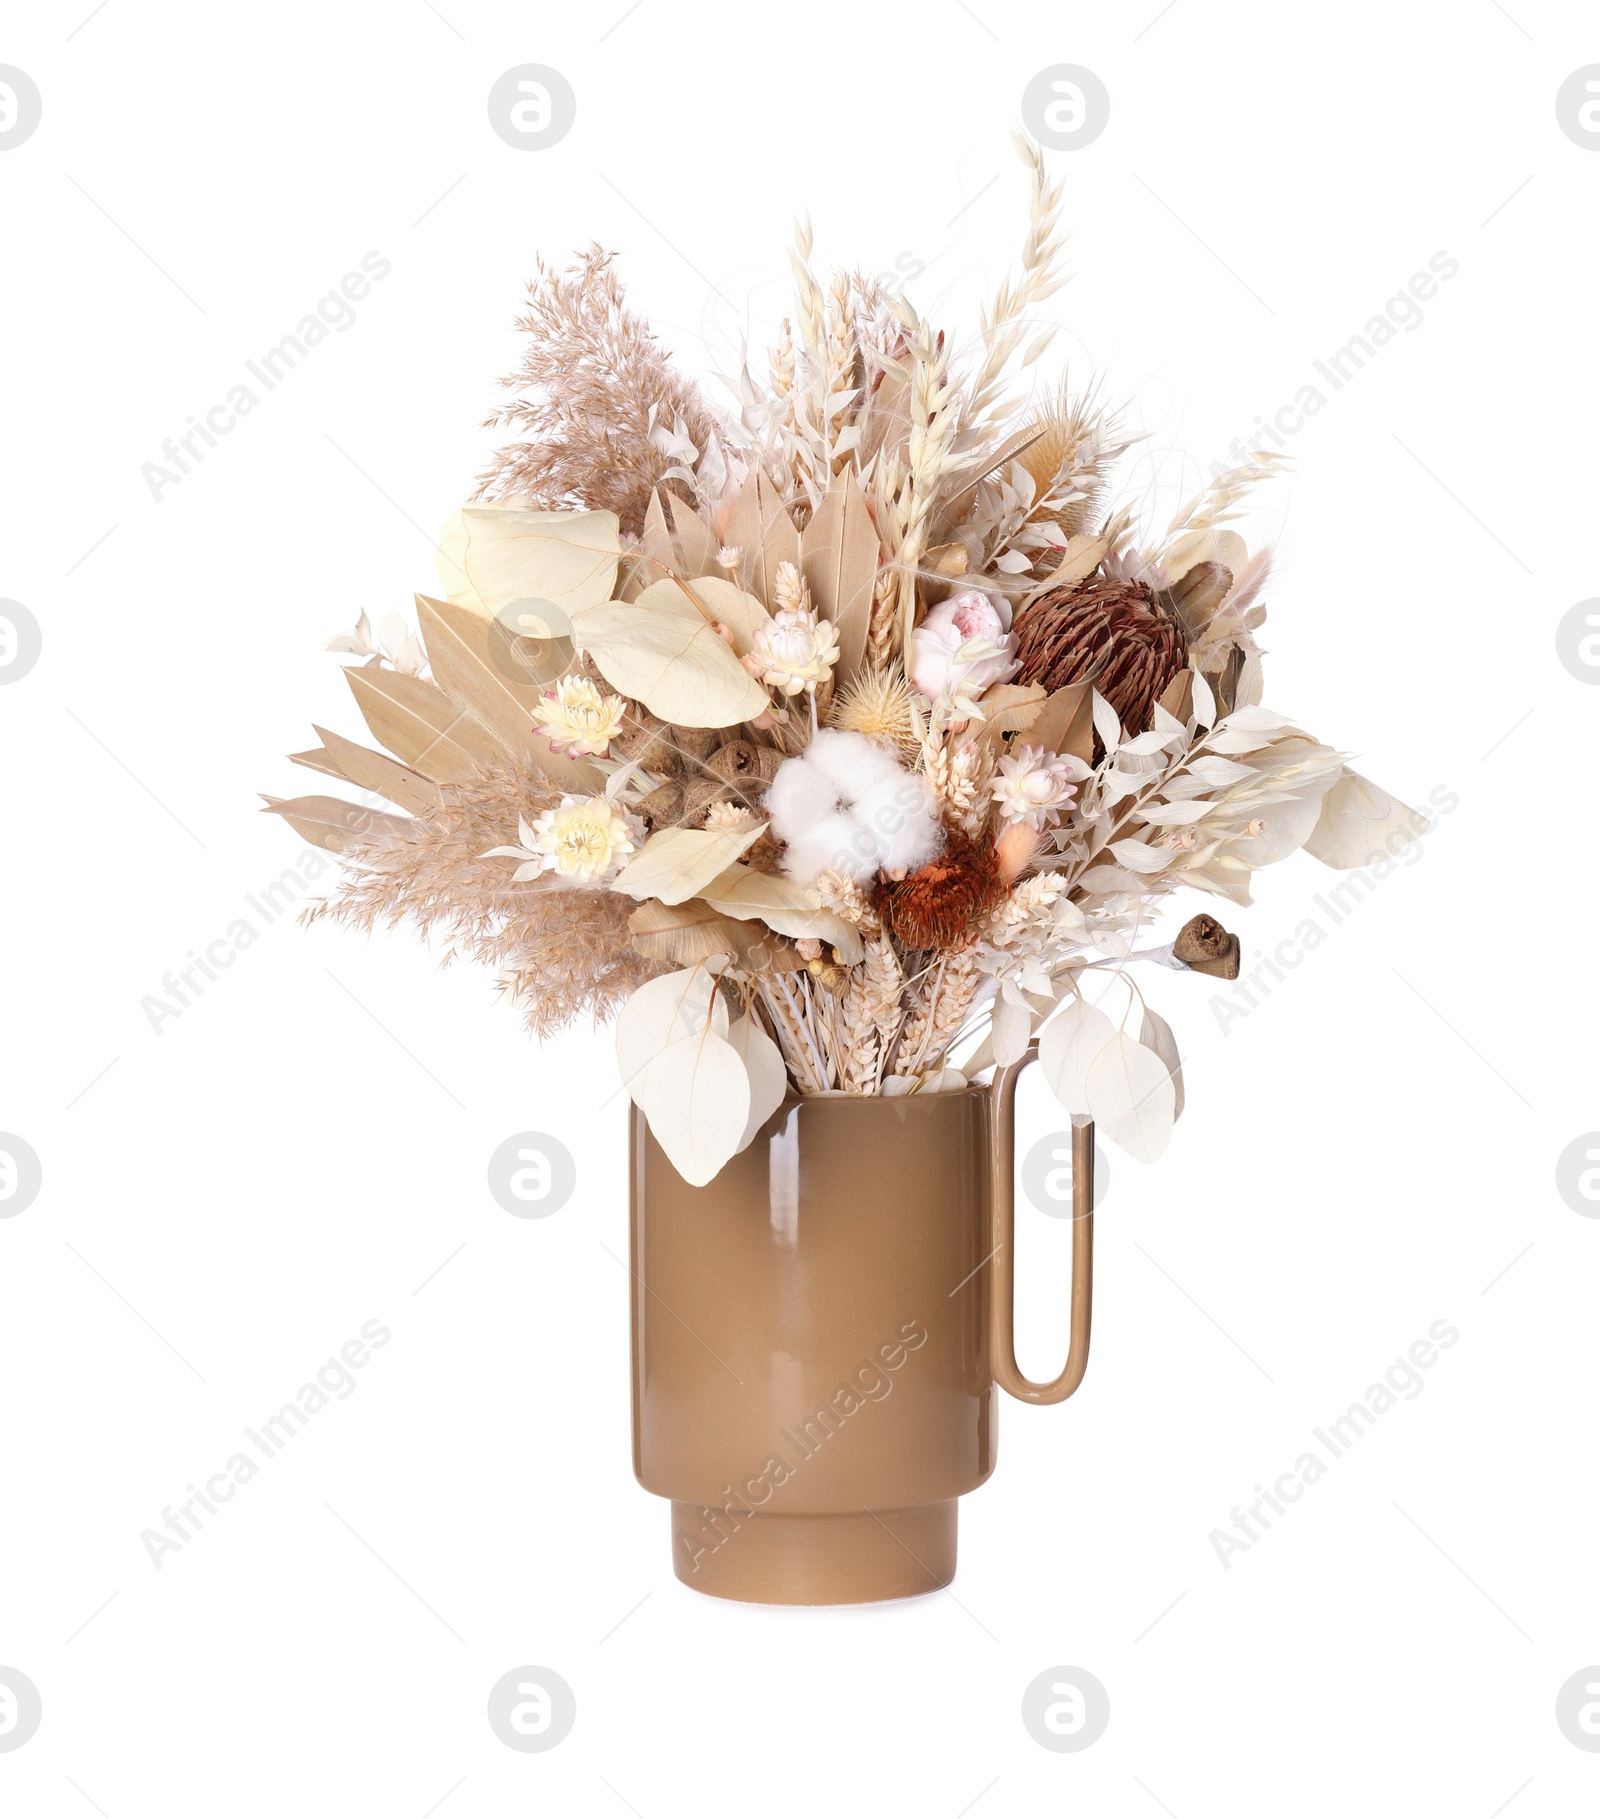 Photo of Stylish ceramic vase with dry flowers and leaves on white background